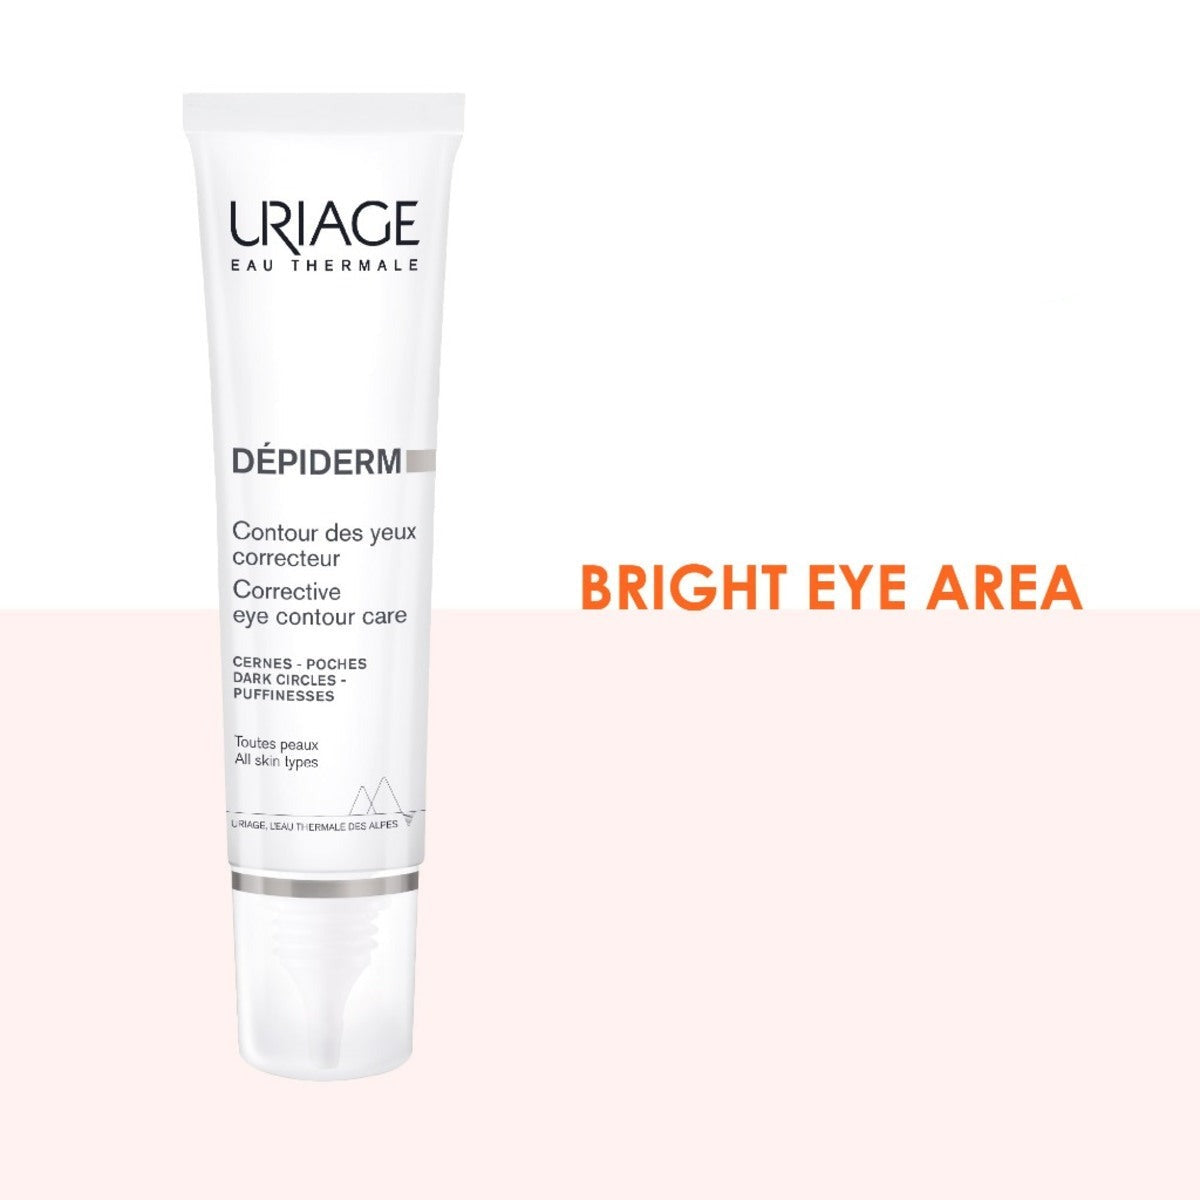 Uriage Depiderm Corrective Eye Contour Care 15ml for Dark Circles, Puffiness